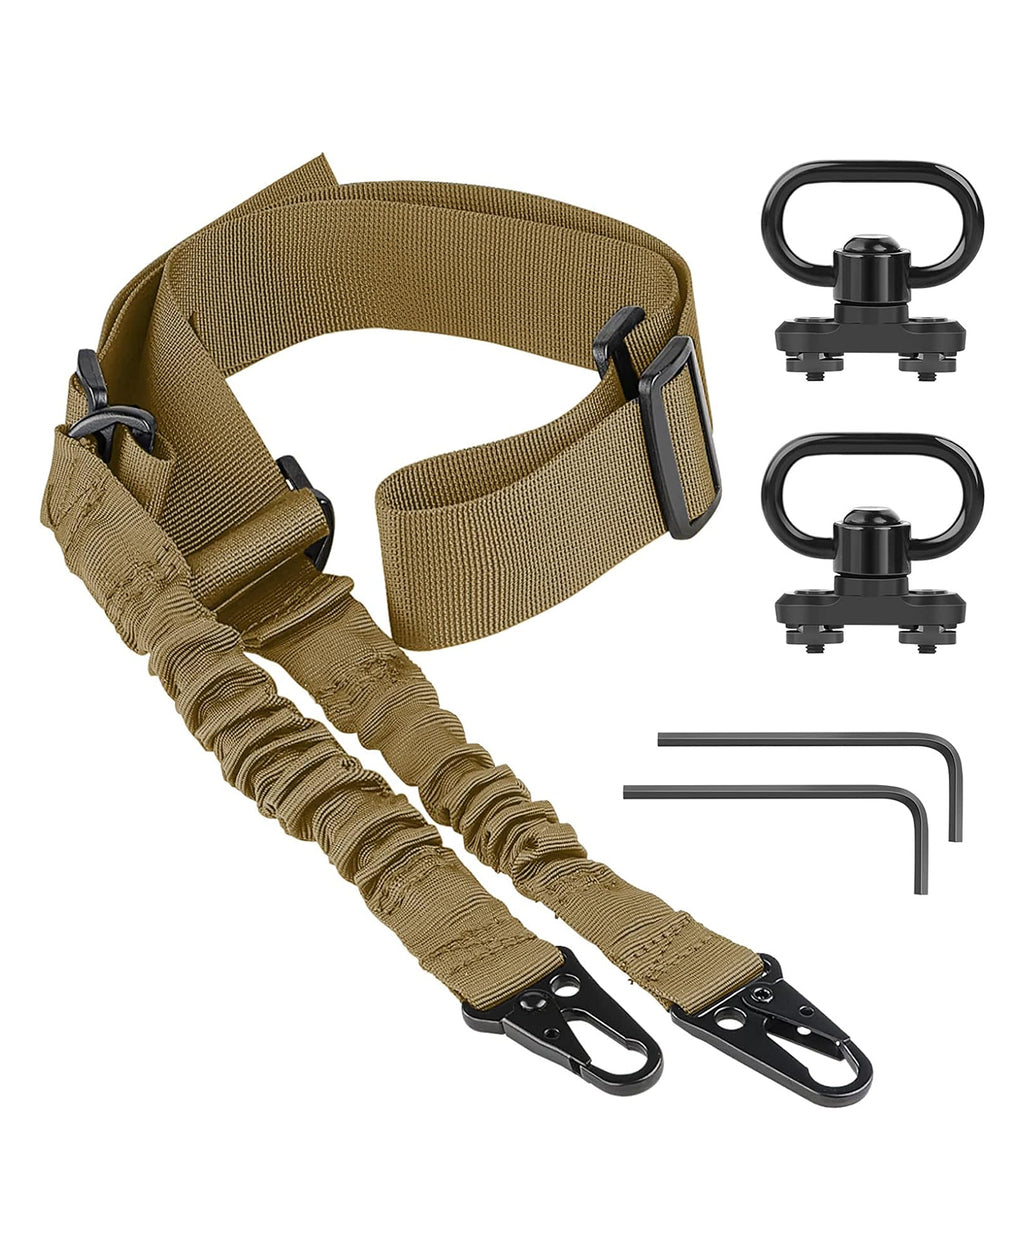 EZshoot 2 Point Sling Adjustable Length with Metal Hook and Sling Swivels